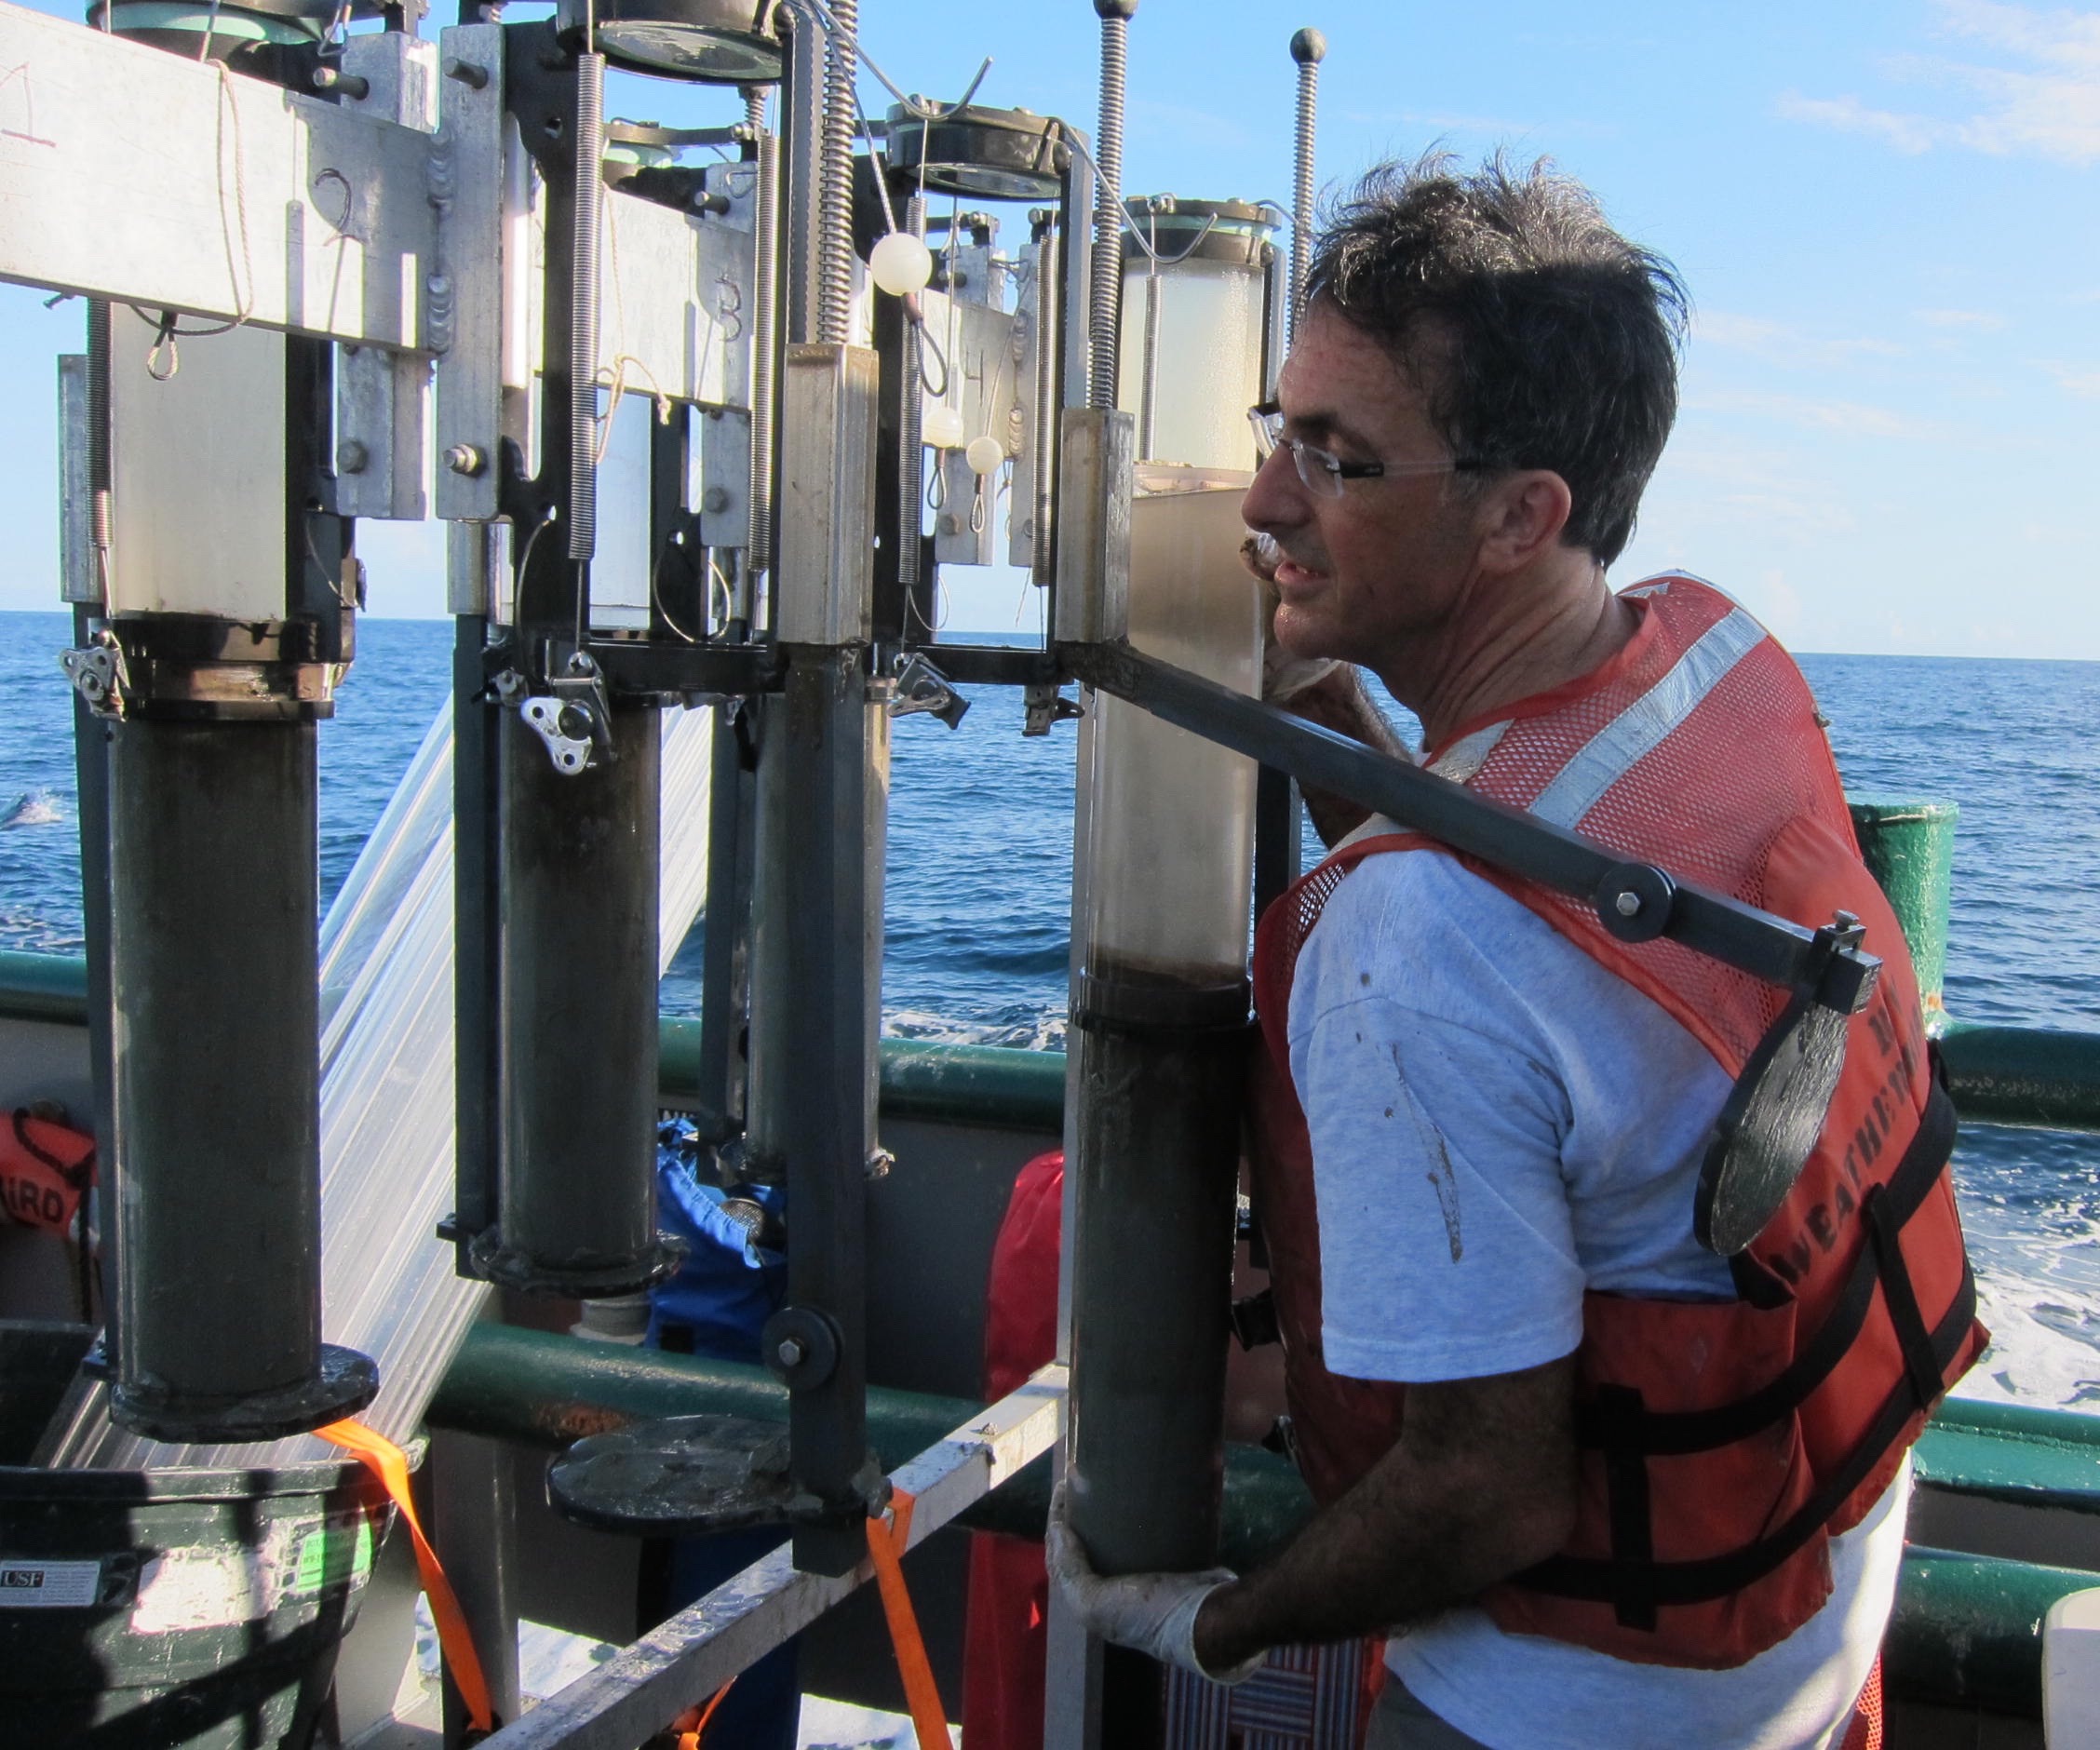 David Hastings removes a sediment core for processing and later analysis.